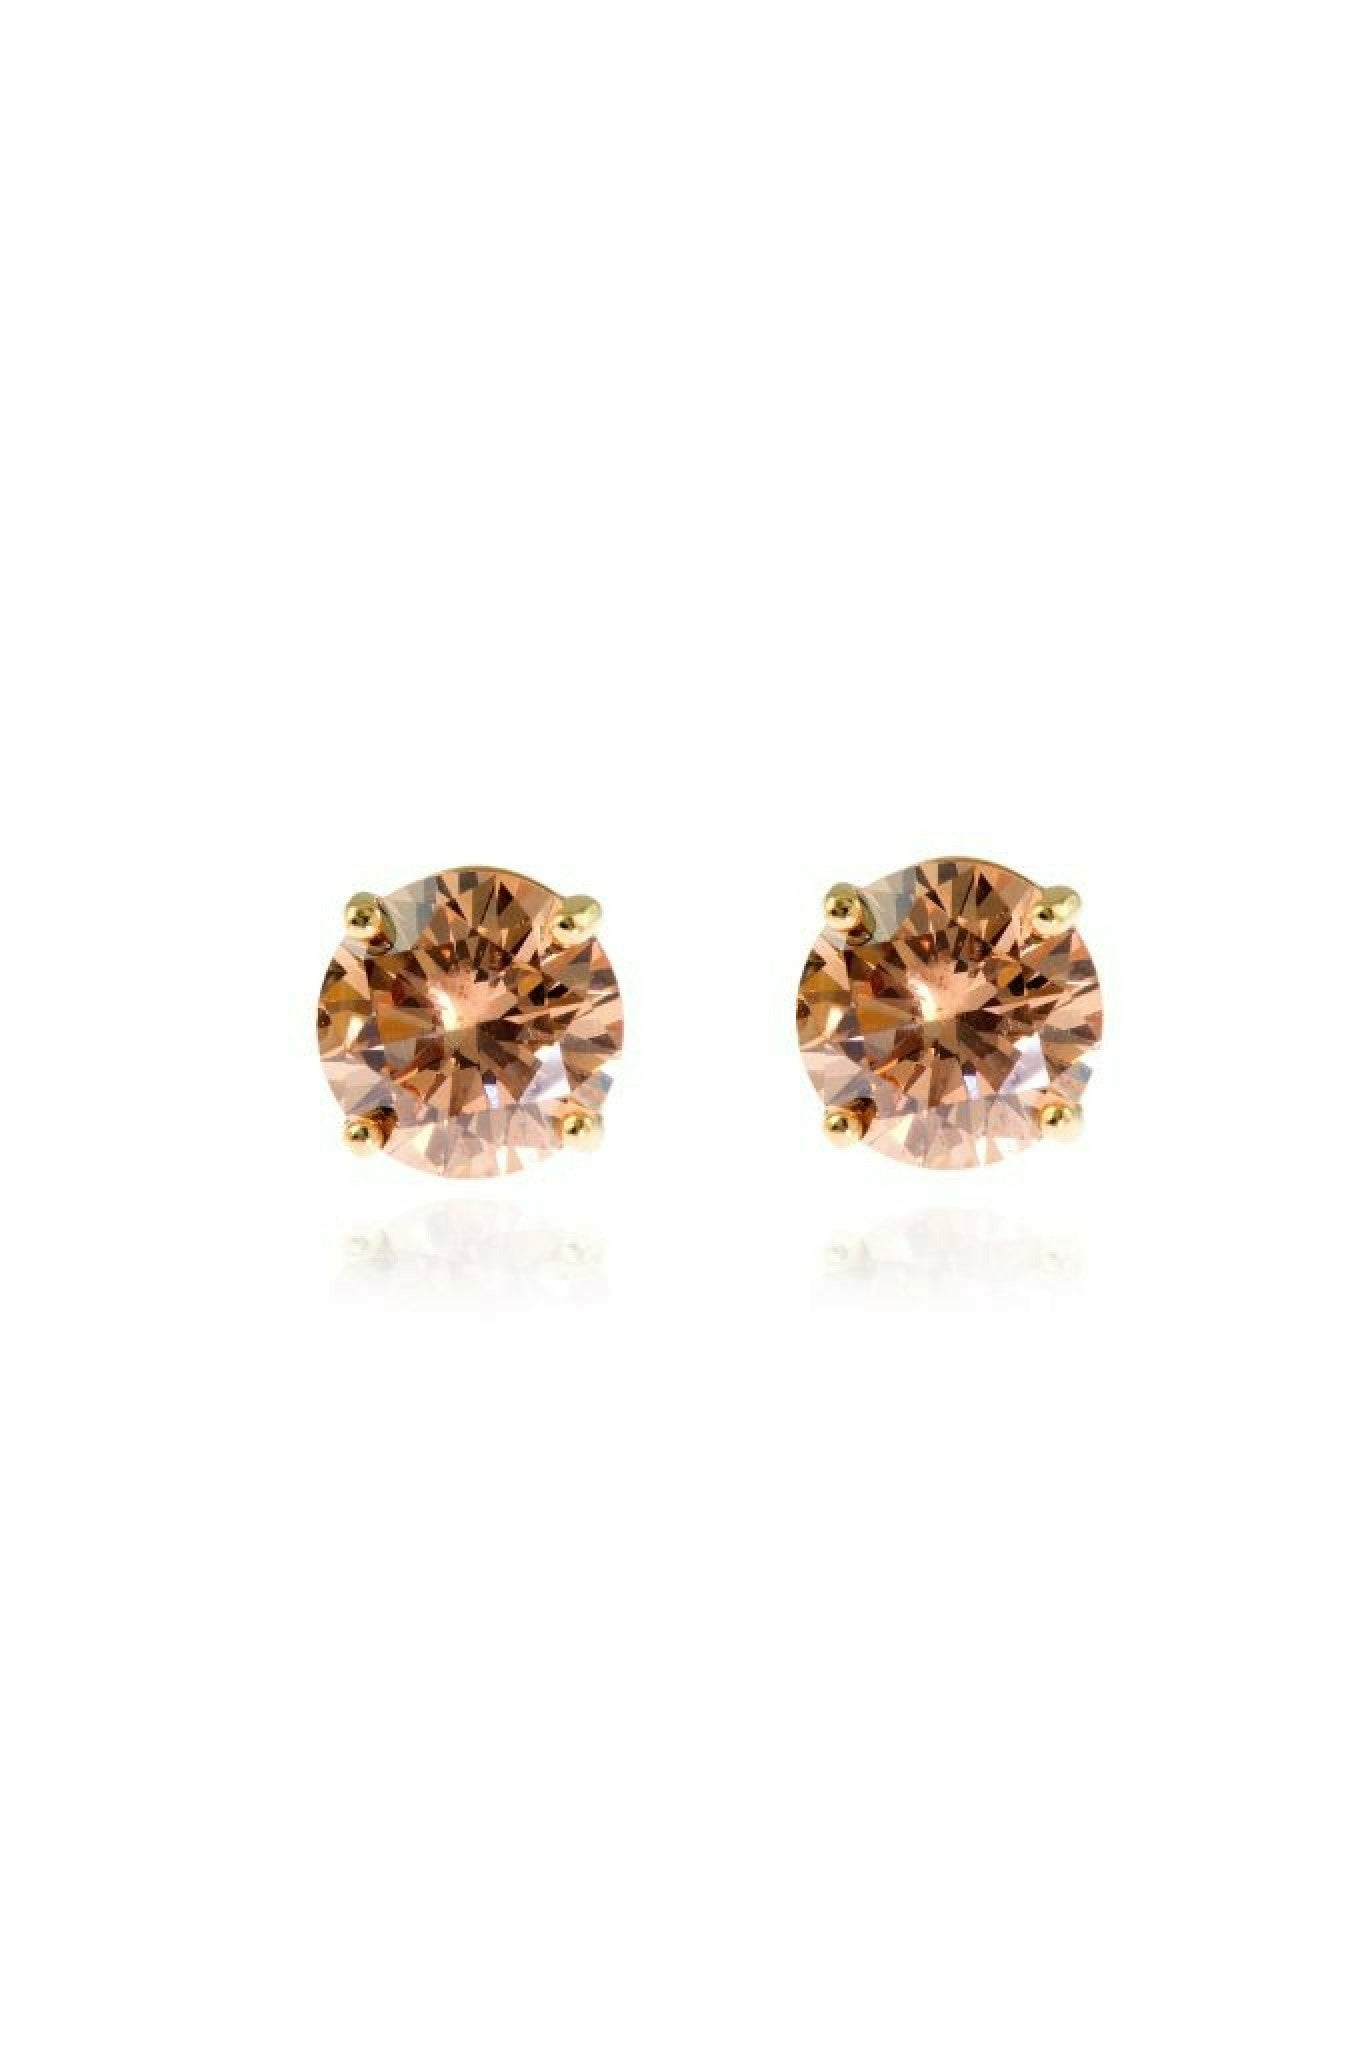 Lana 8mm-Sterling Silver, 18ct Gold Plated Earrings with Champagne CZ Cachet London